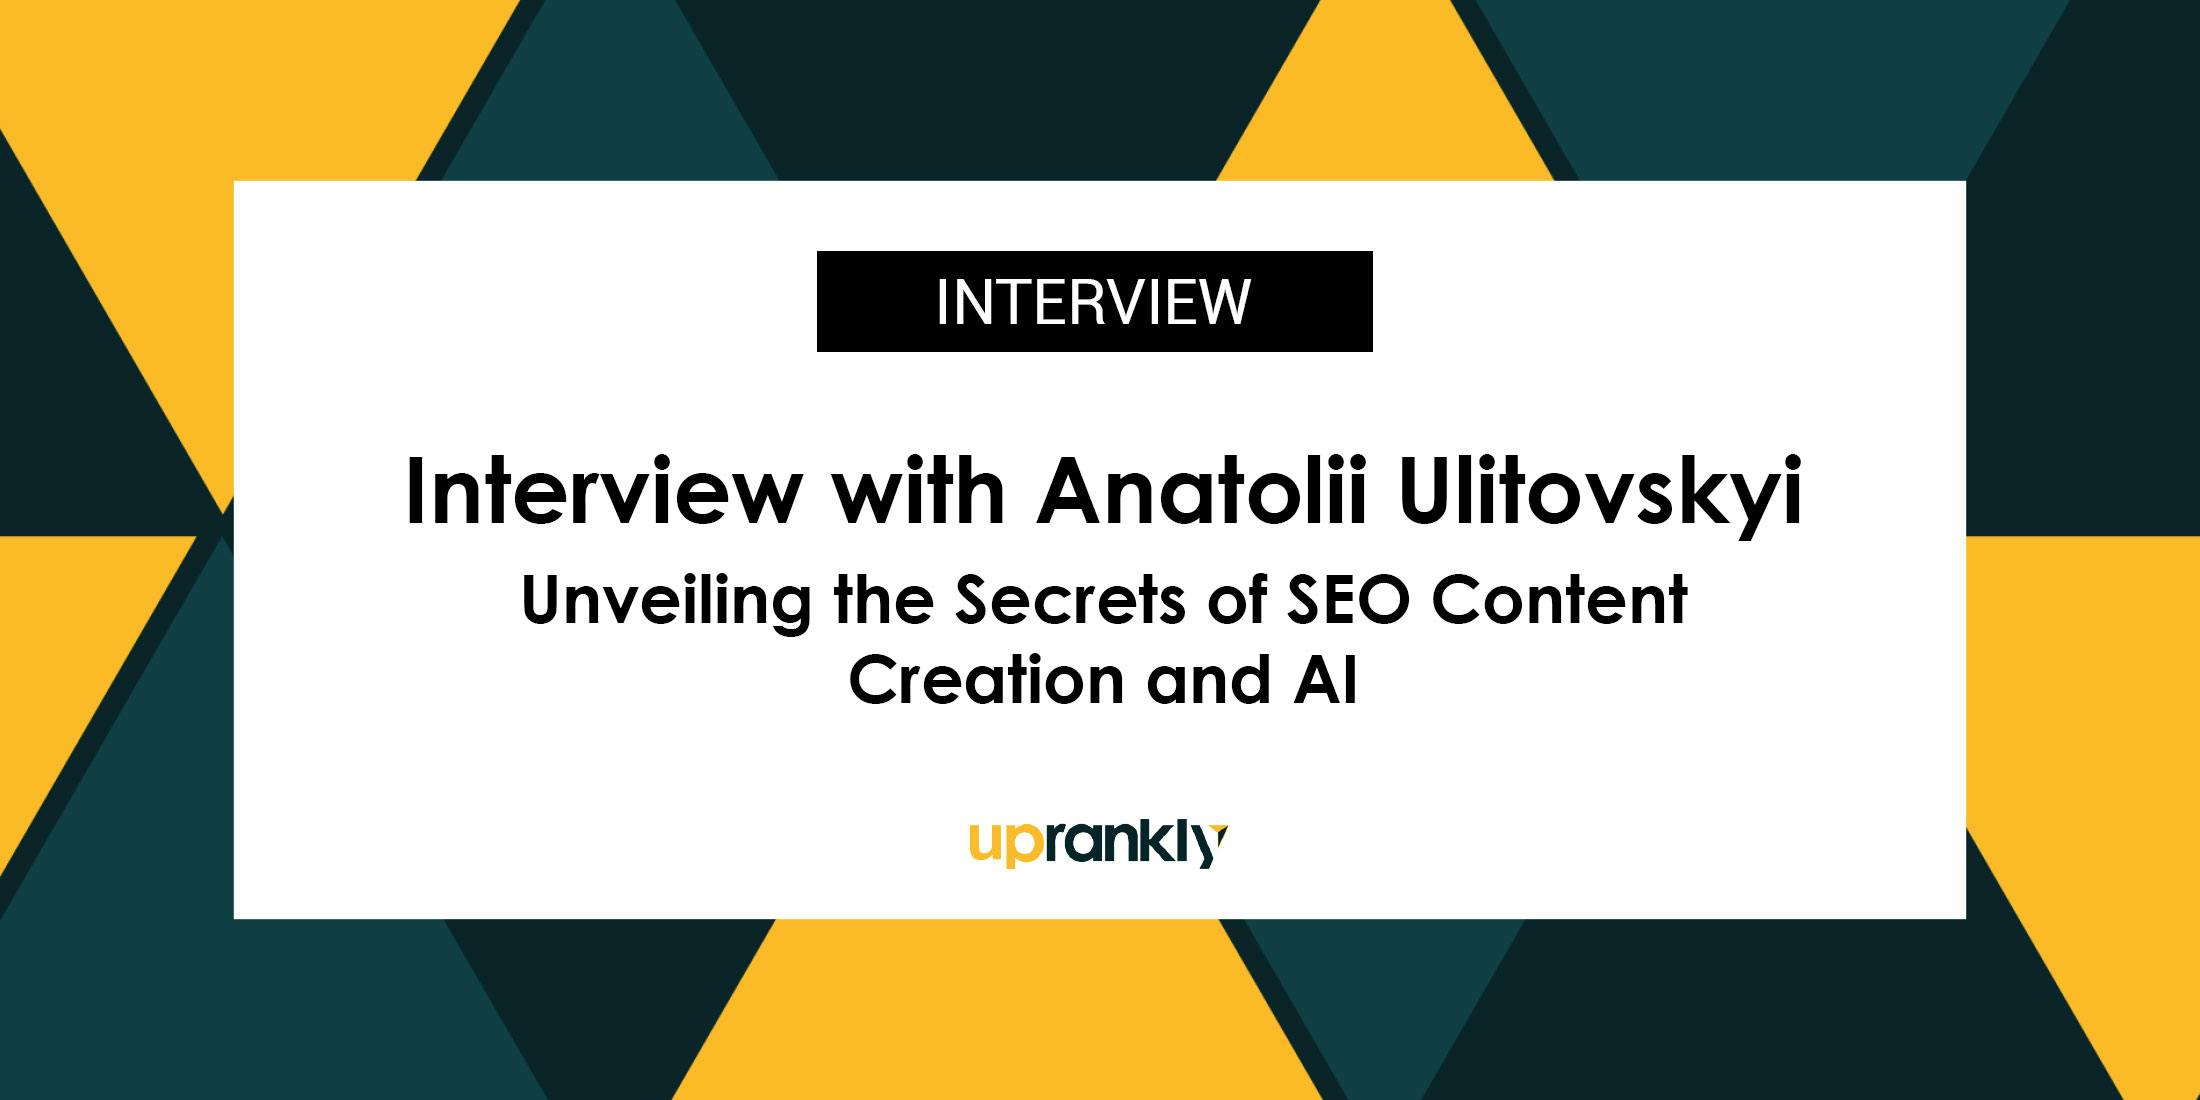 Unveiling the Secrets of SEO Content Creation and AI: An Interview with Anatolii Ulitovskyi